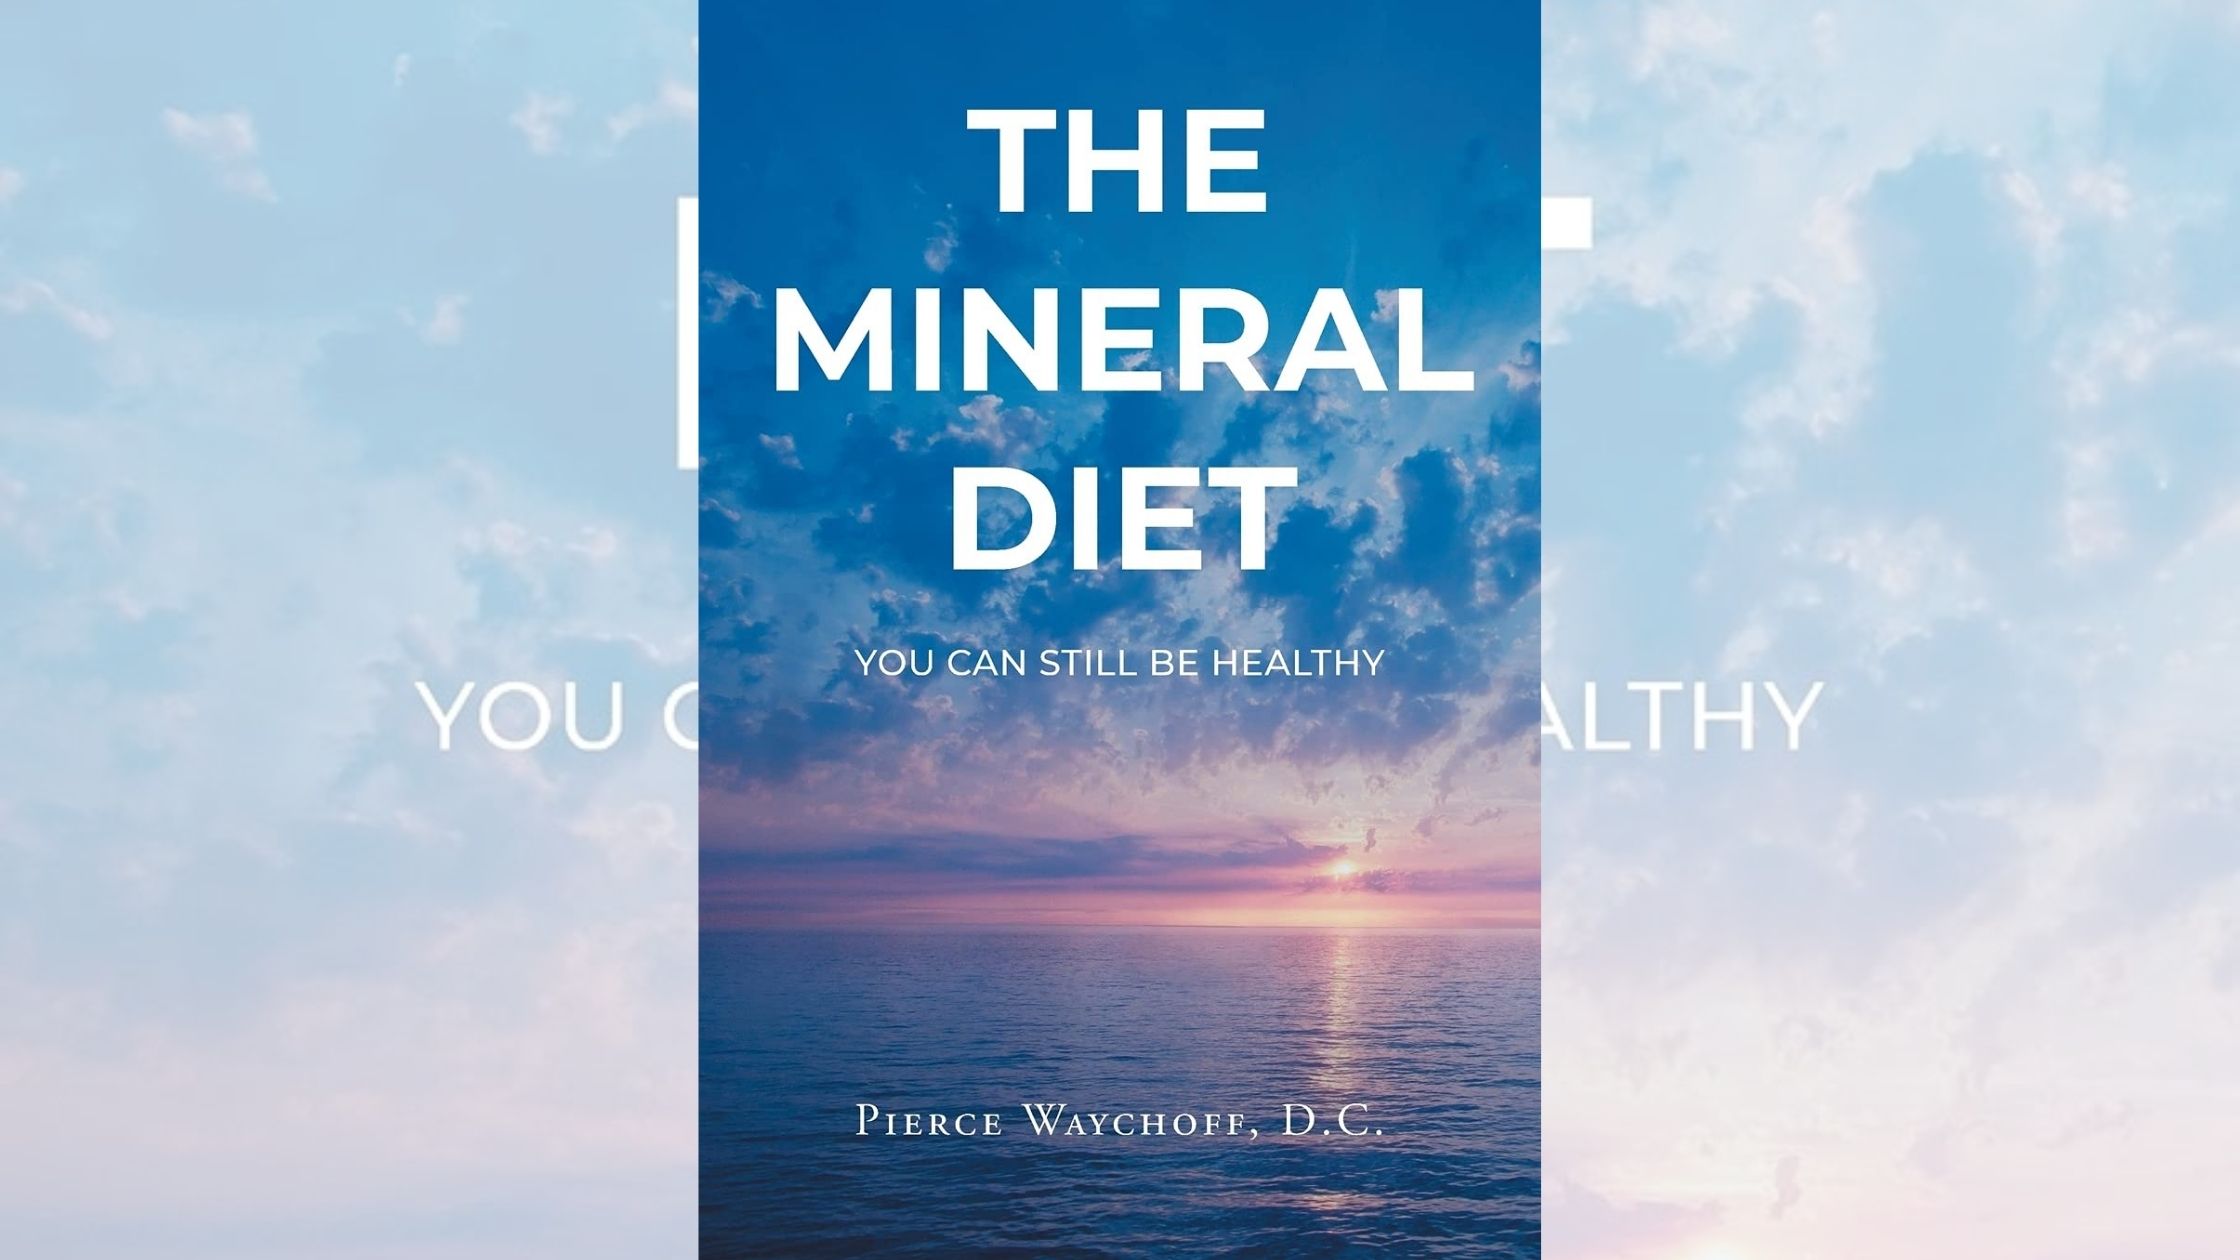 Author Pierce Waychoff, D.C.’s new book “The Mineral Diet” focuses on the ideal internal environment of the body required for an individual to be healthy